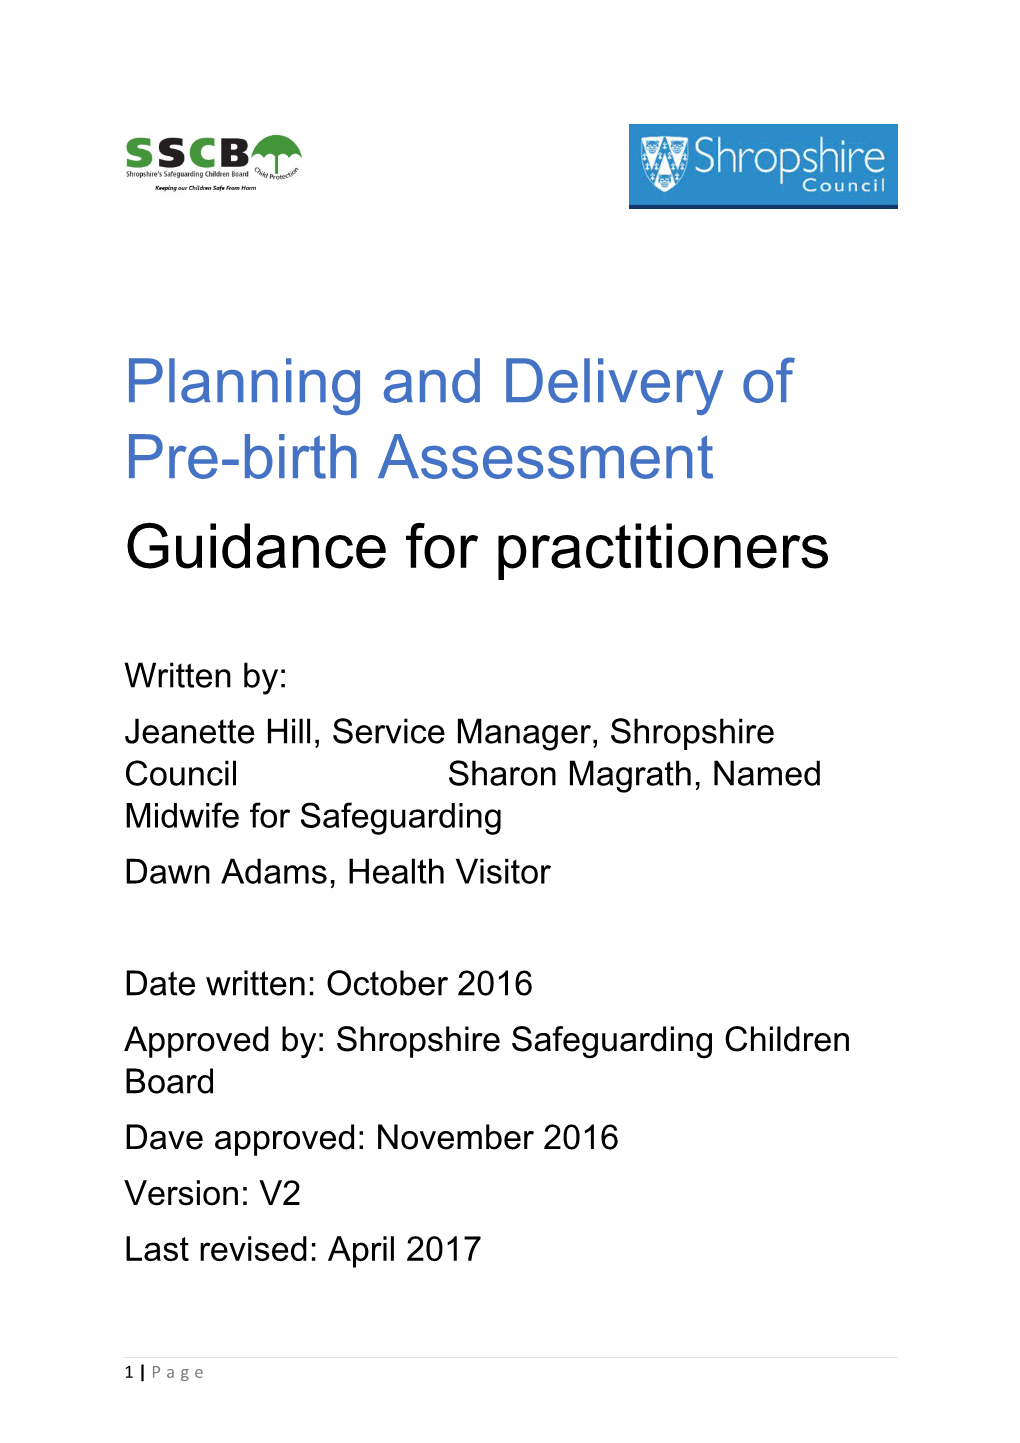 Planning and Delivery of Pre-Birth Assessment